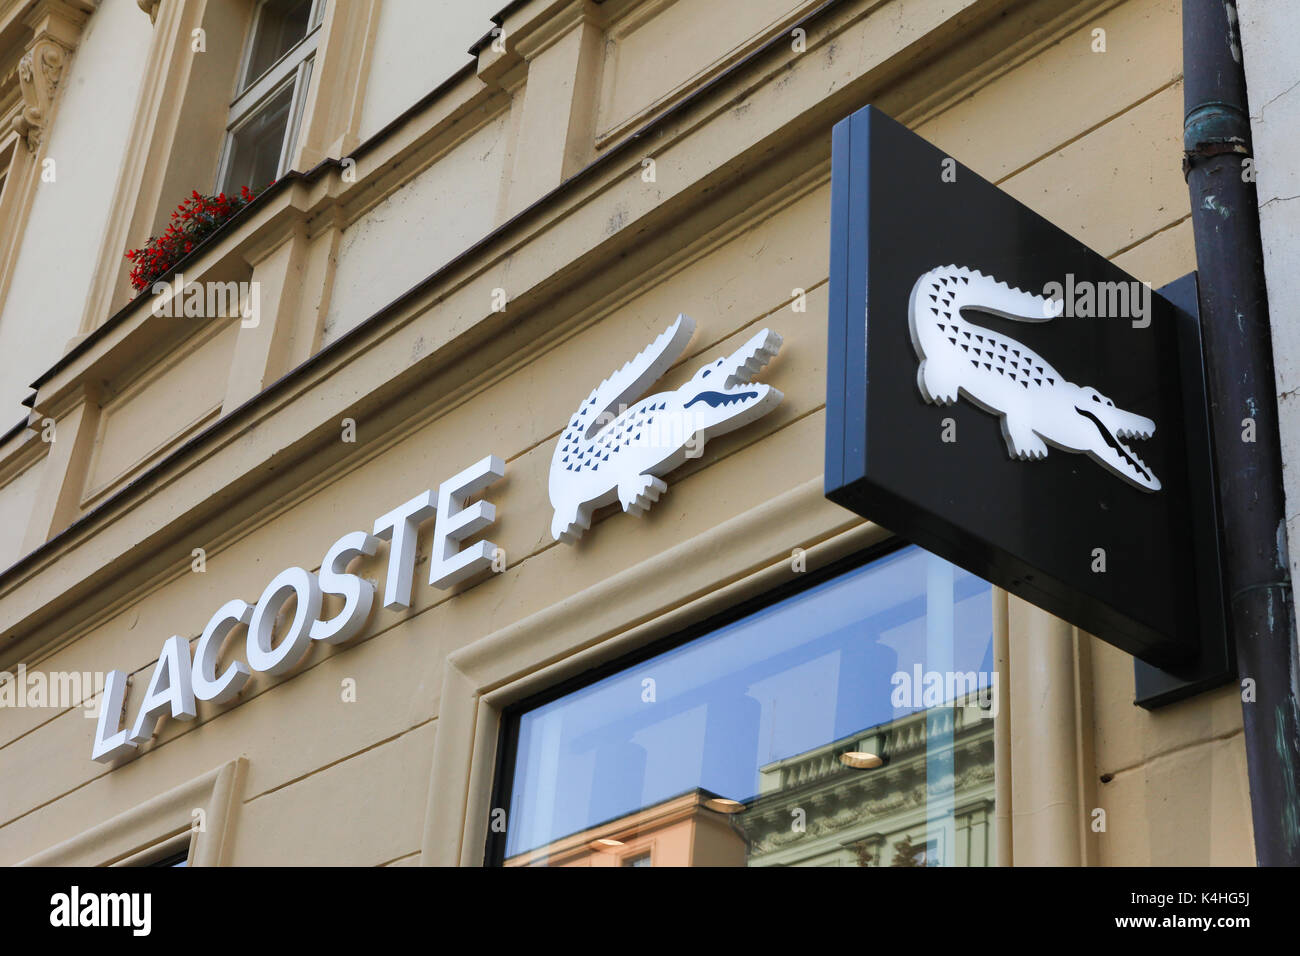 Lacoste sign on a store. Lacoste is a French clothing company that sells high-end clothing, footwear, perfume, leather goods, and most famously polo s Stock Photo